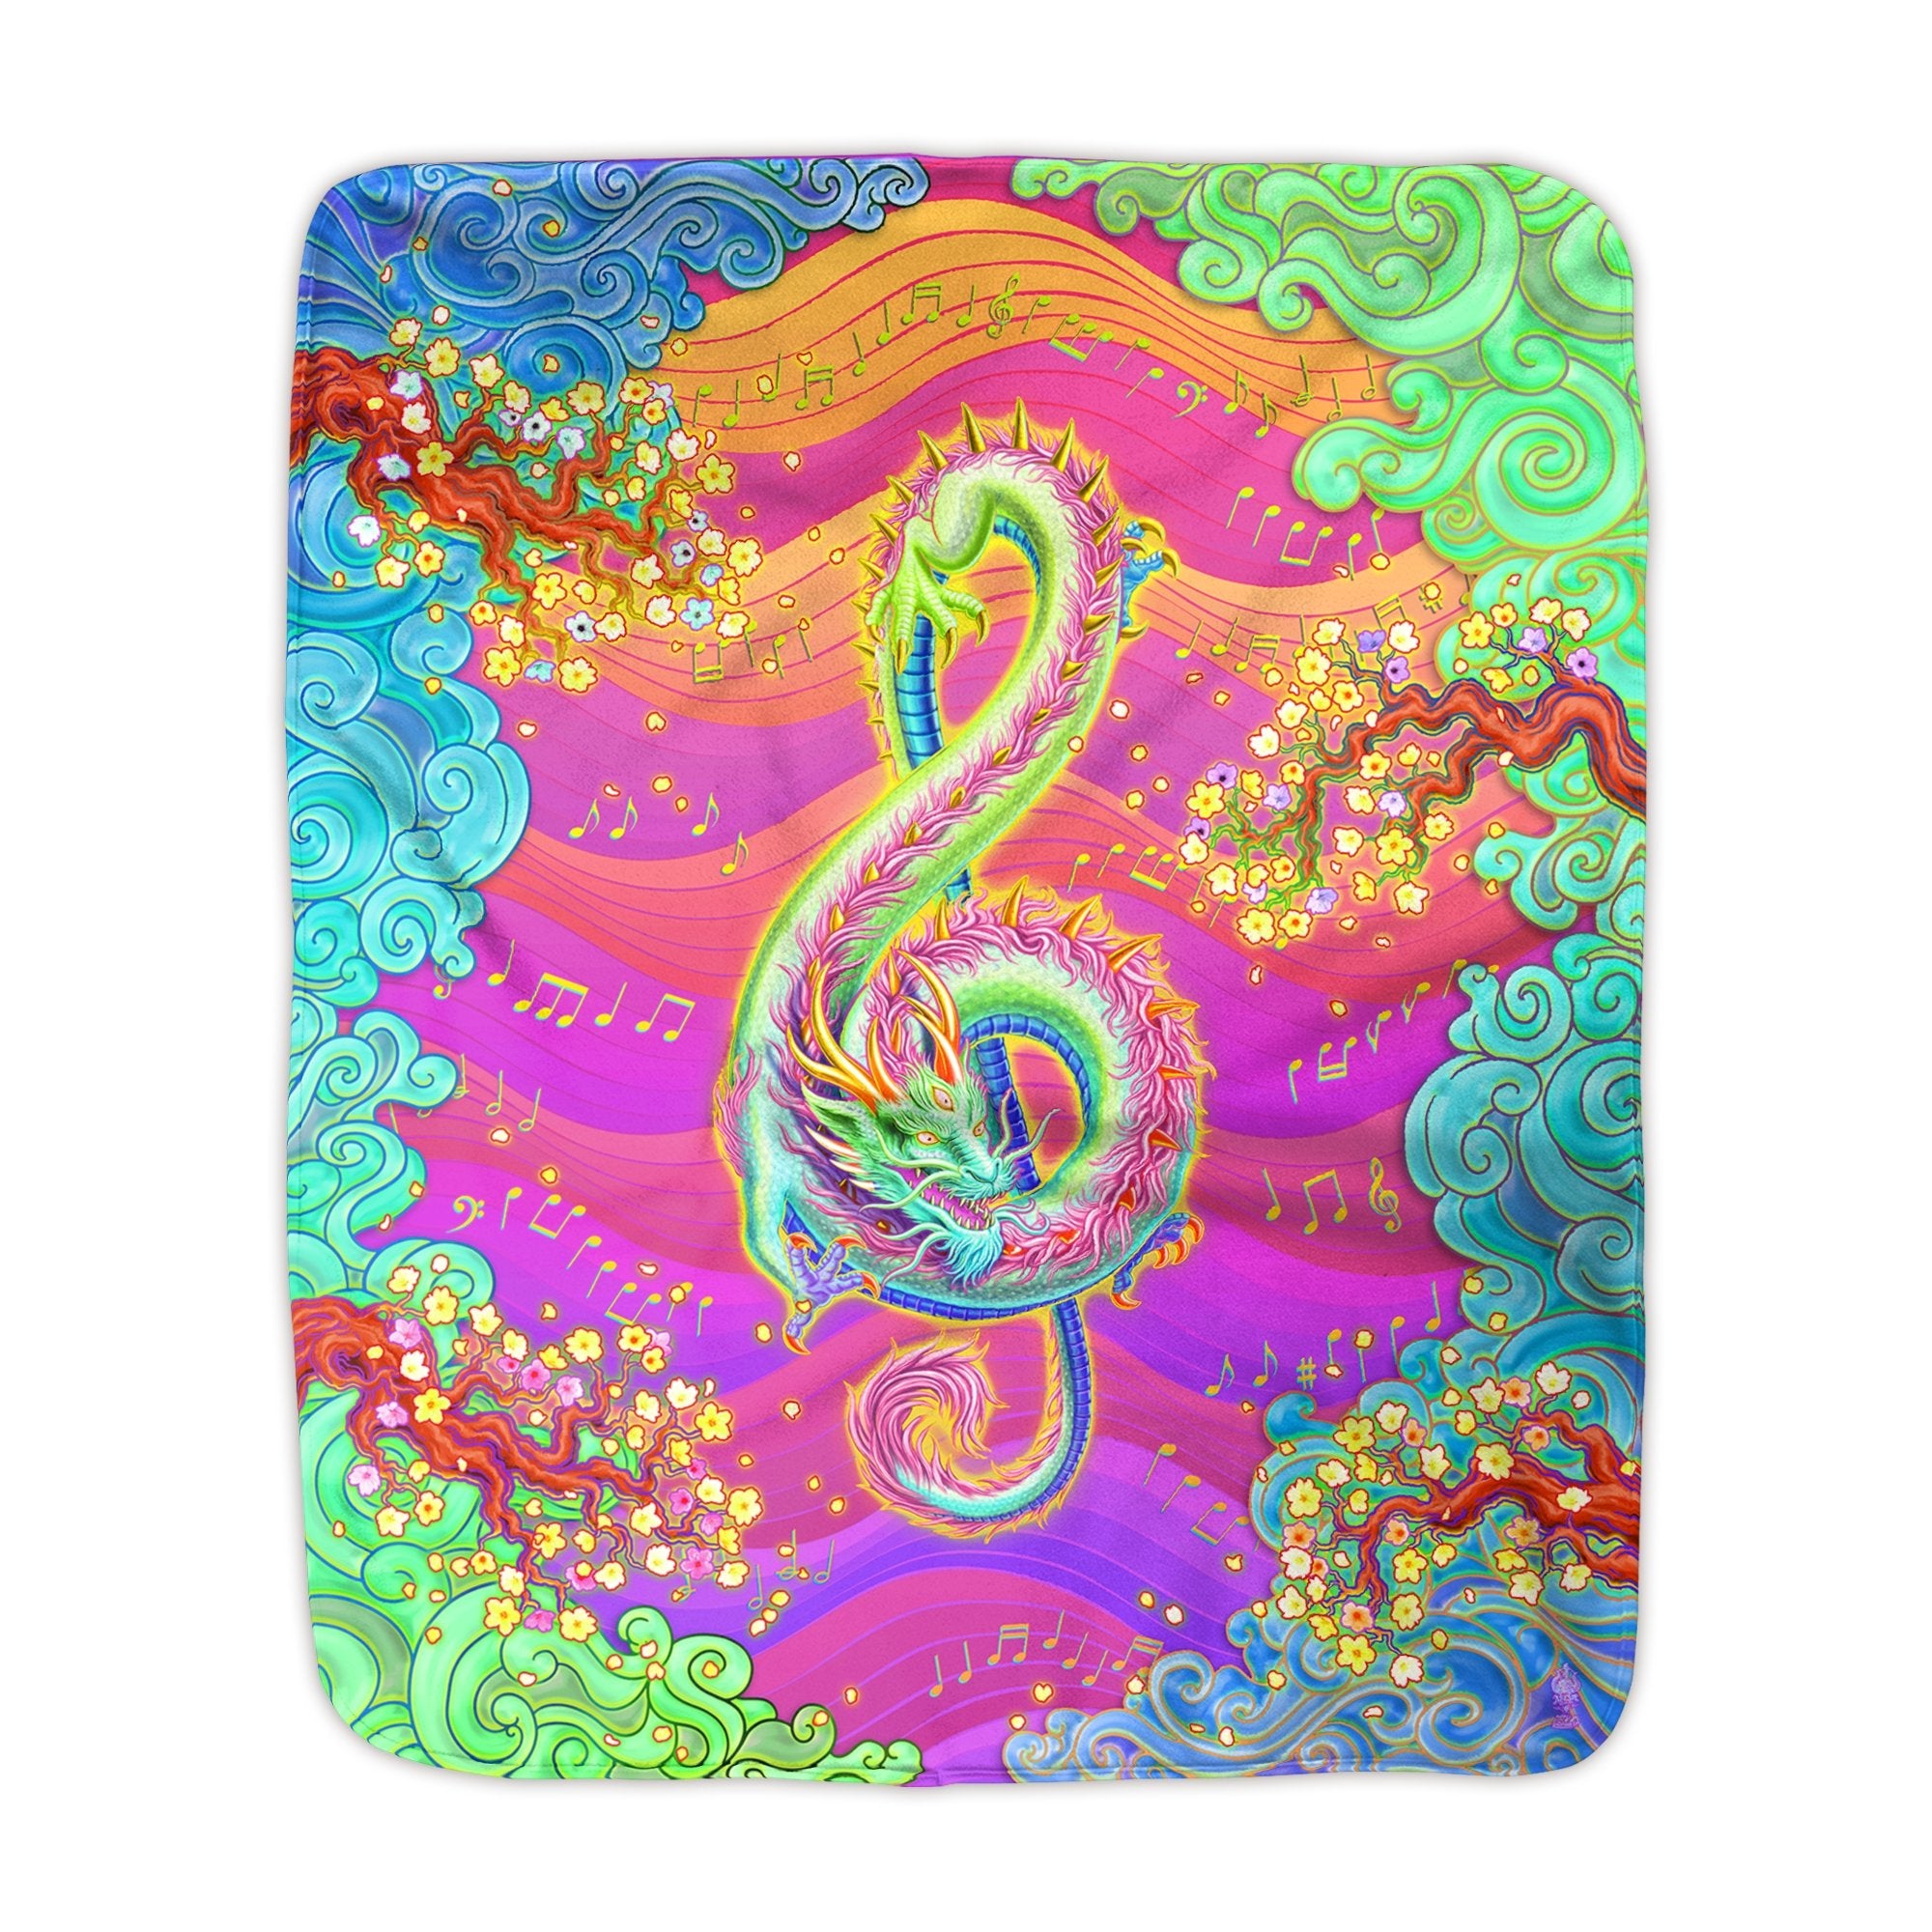 Psy Dragon Throw Fleece Blanket, Treble Clef, Music Art, Chinese Decor, Eclectic and Funky Gift - Psychedelic Neon - Abysm Internal